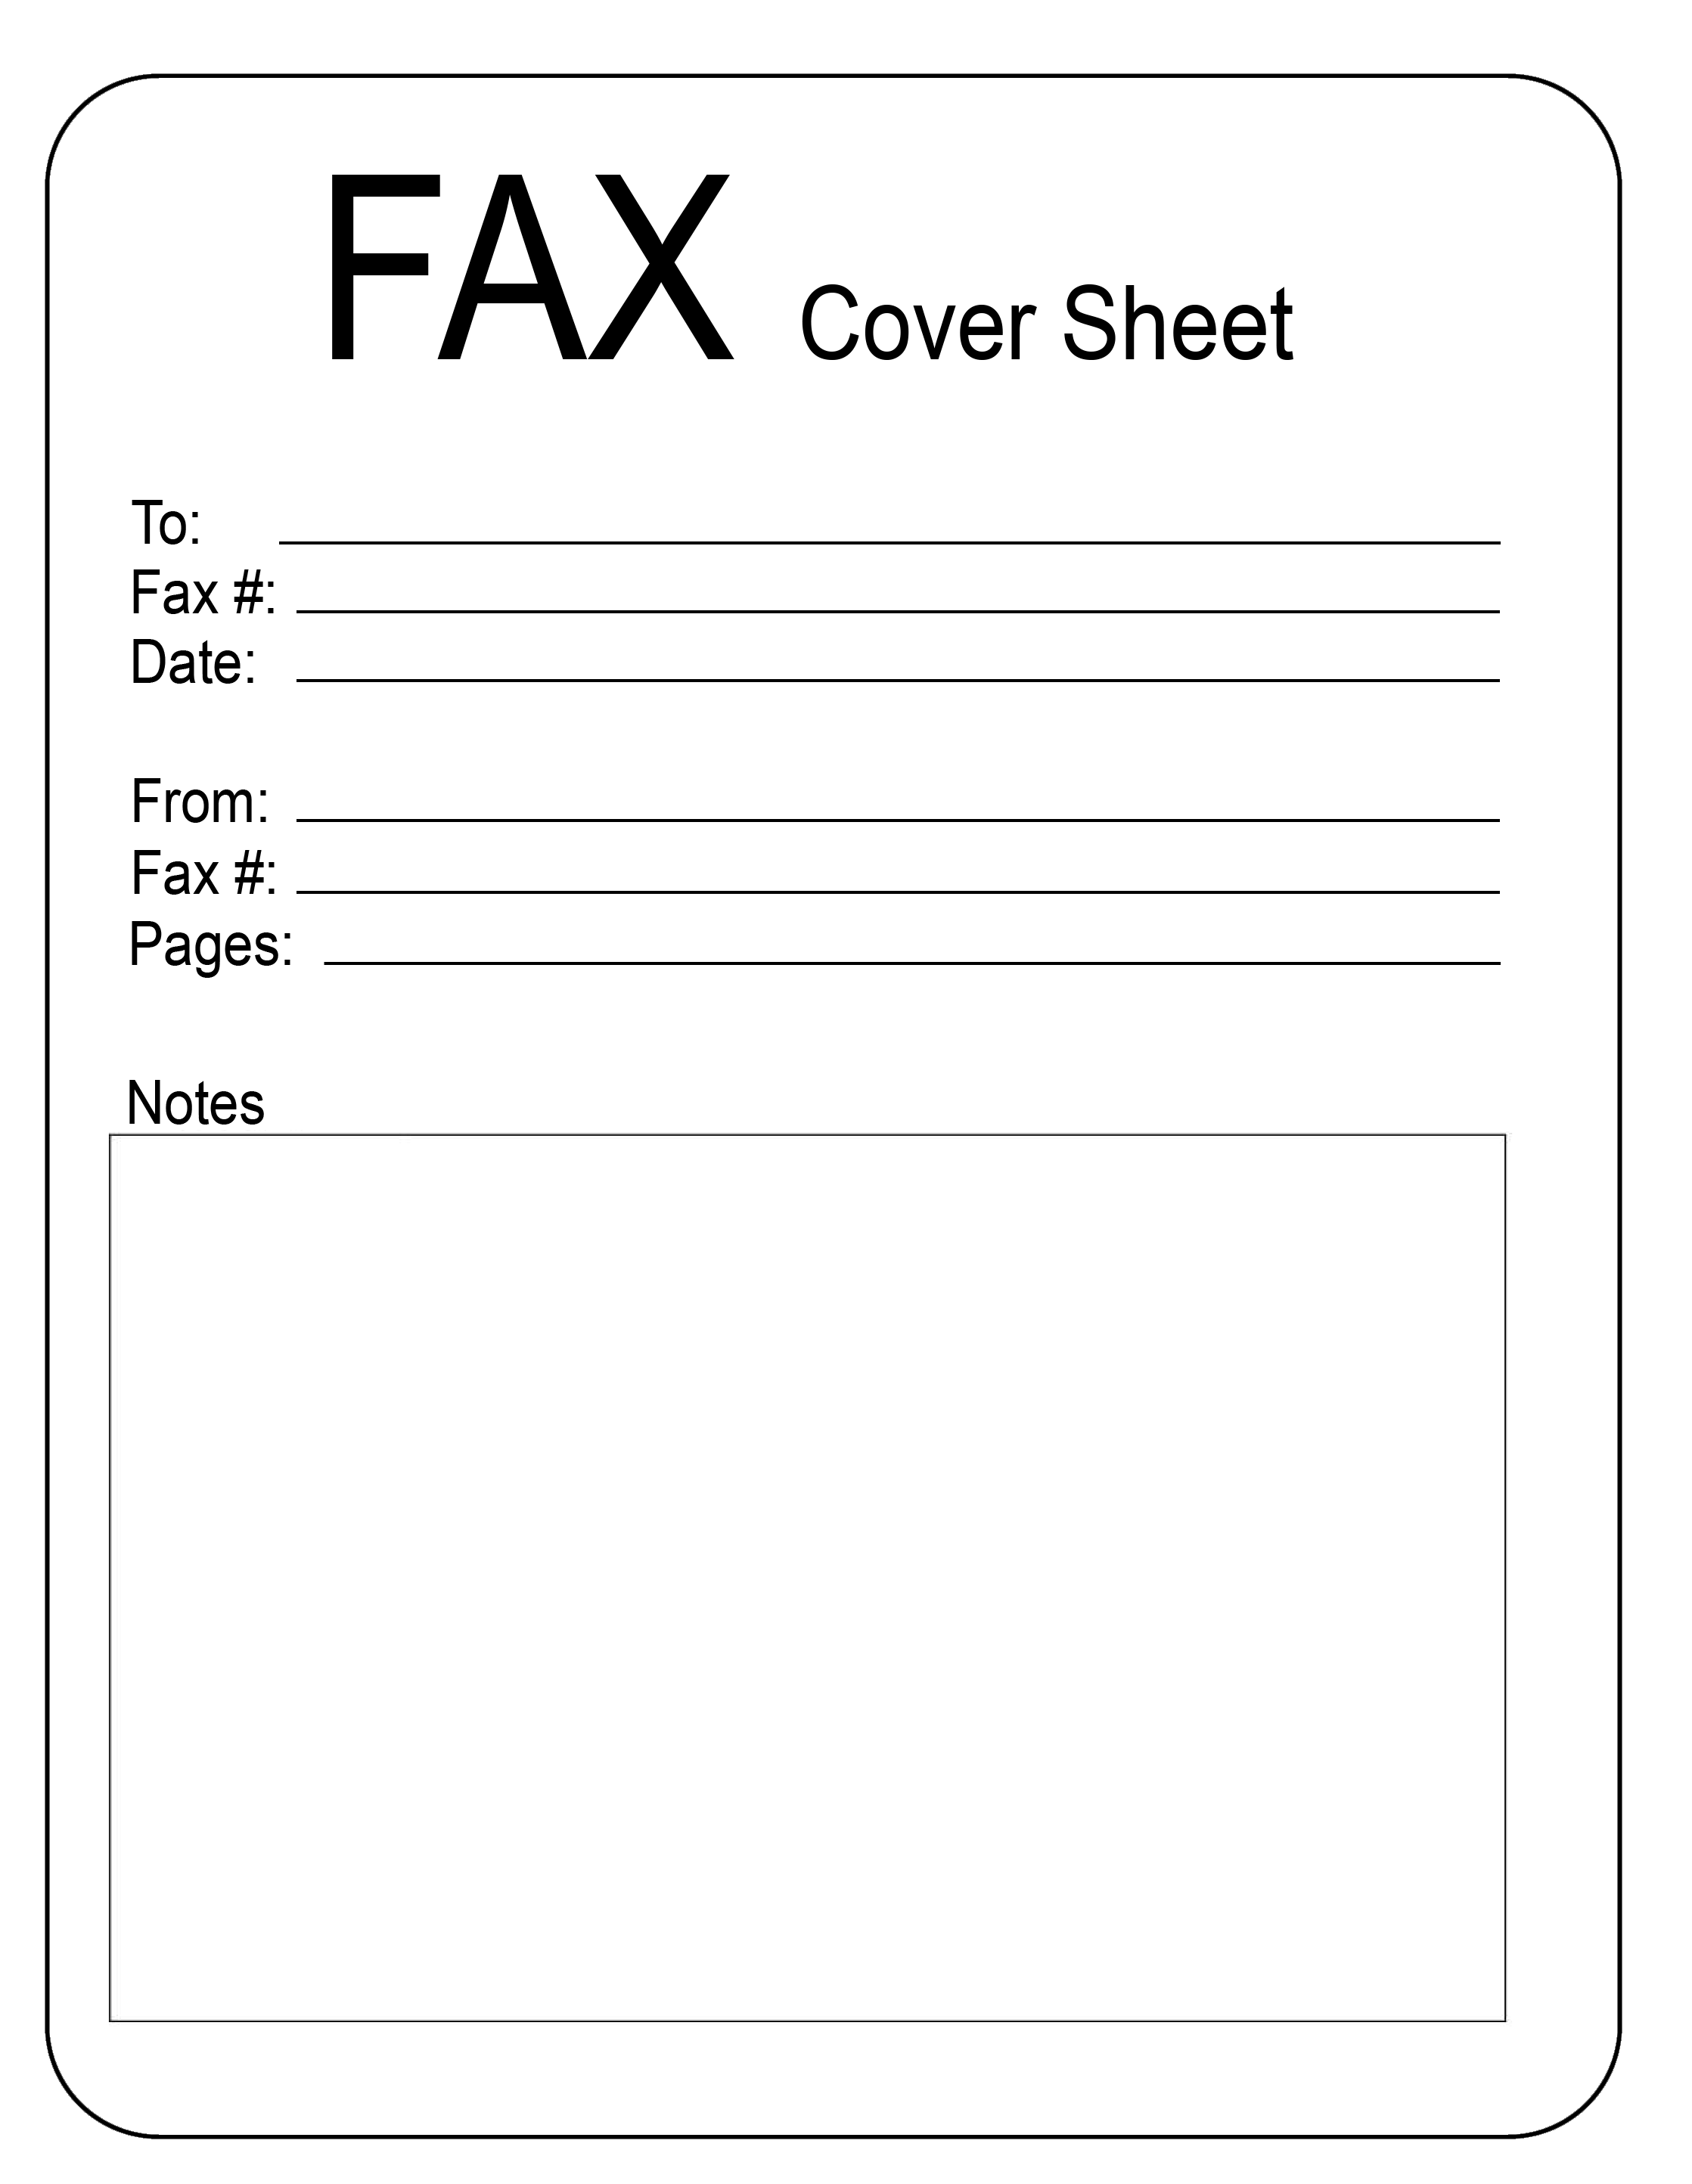 Personal Fax Cover Sheet Template from faxcoversheethub.com